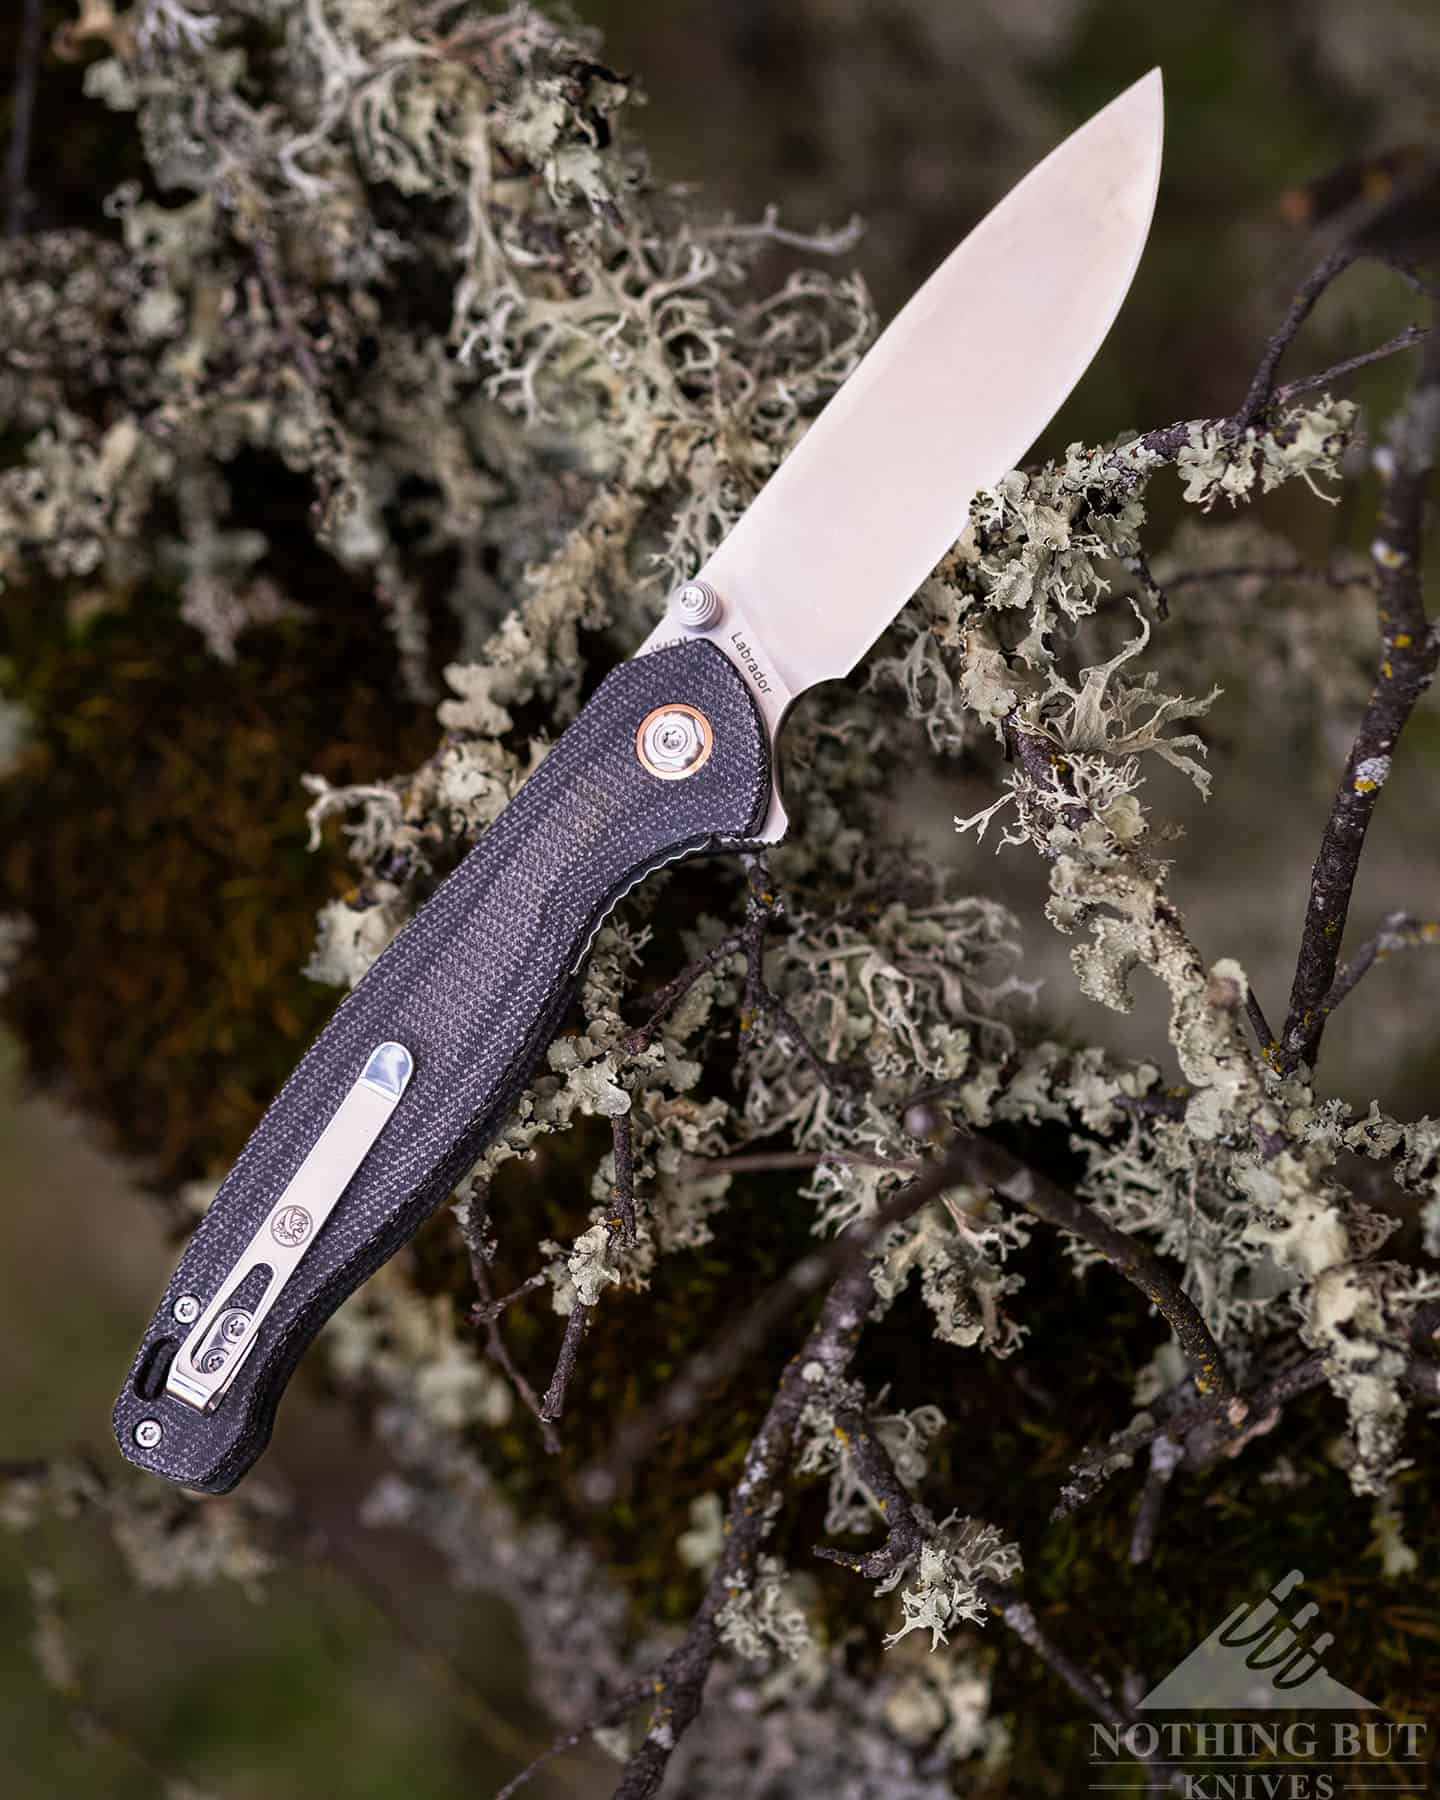 The Vosteed Labrador is one of our all time favorite pocket knives under $100. 